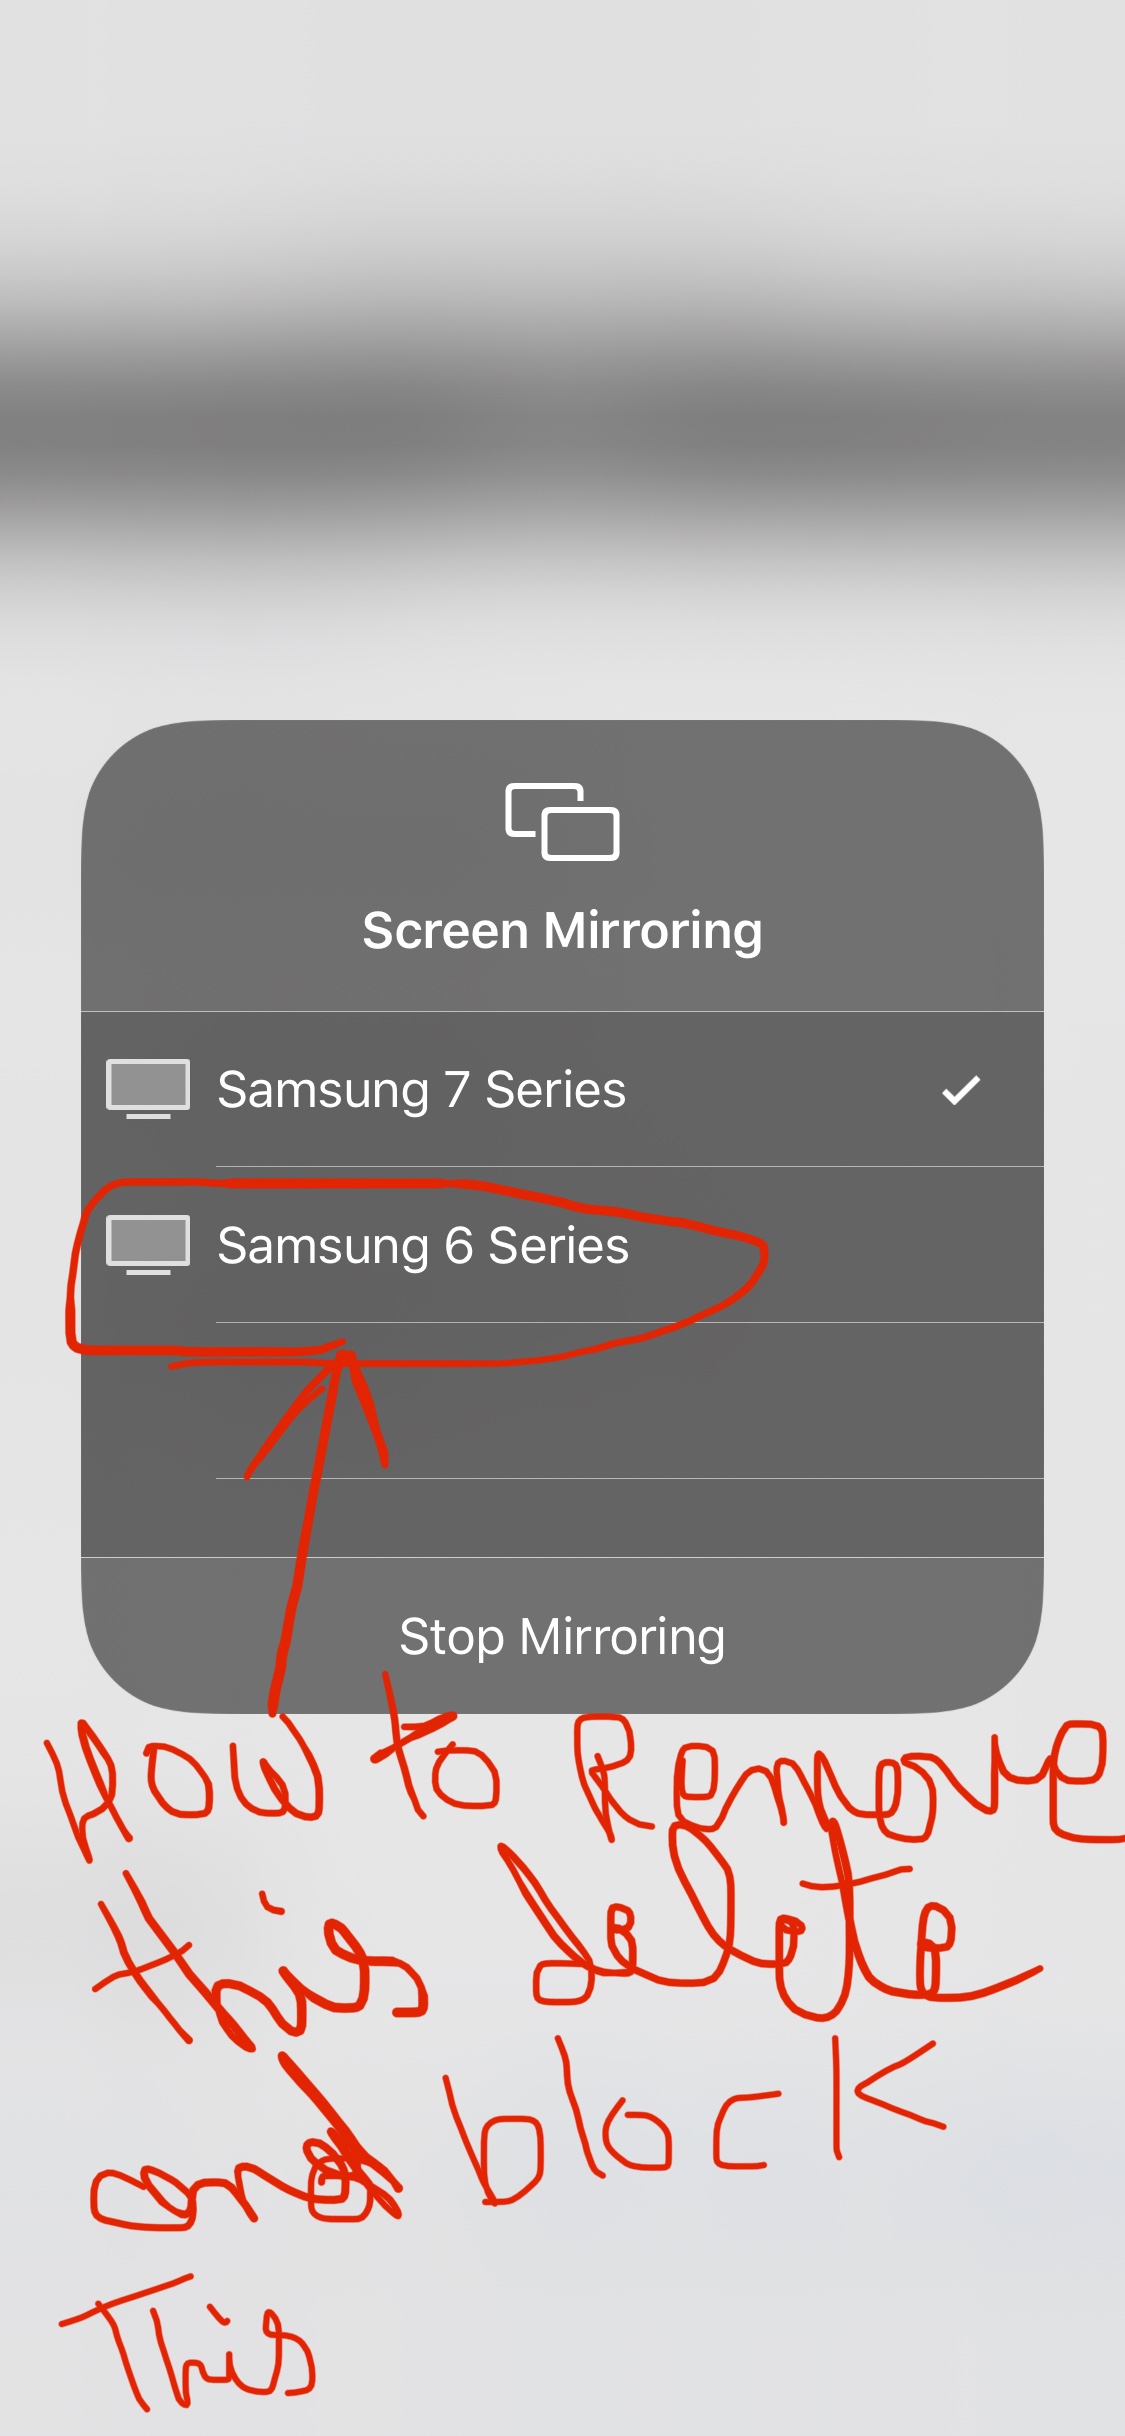 How To Remove Samsung Tv From Iphone, How To Remove Mirroring From Iphone